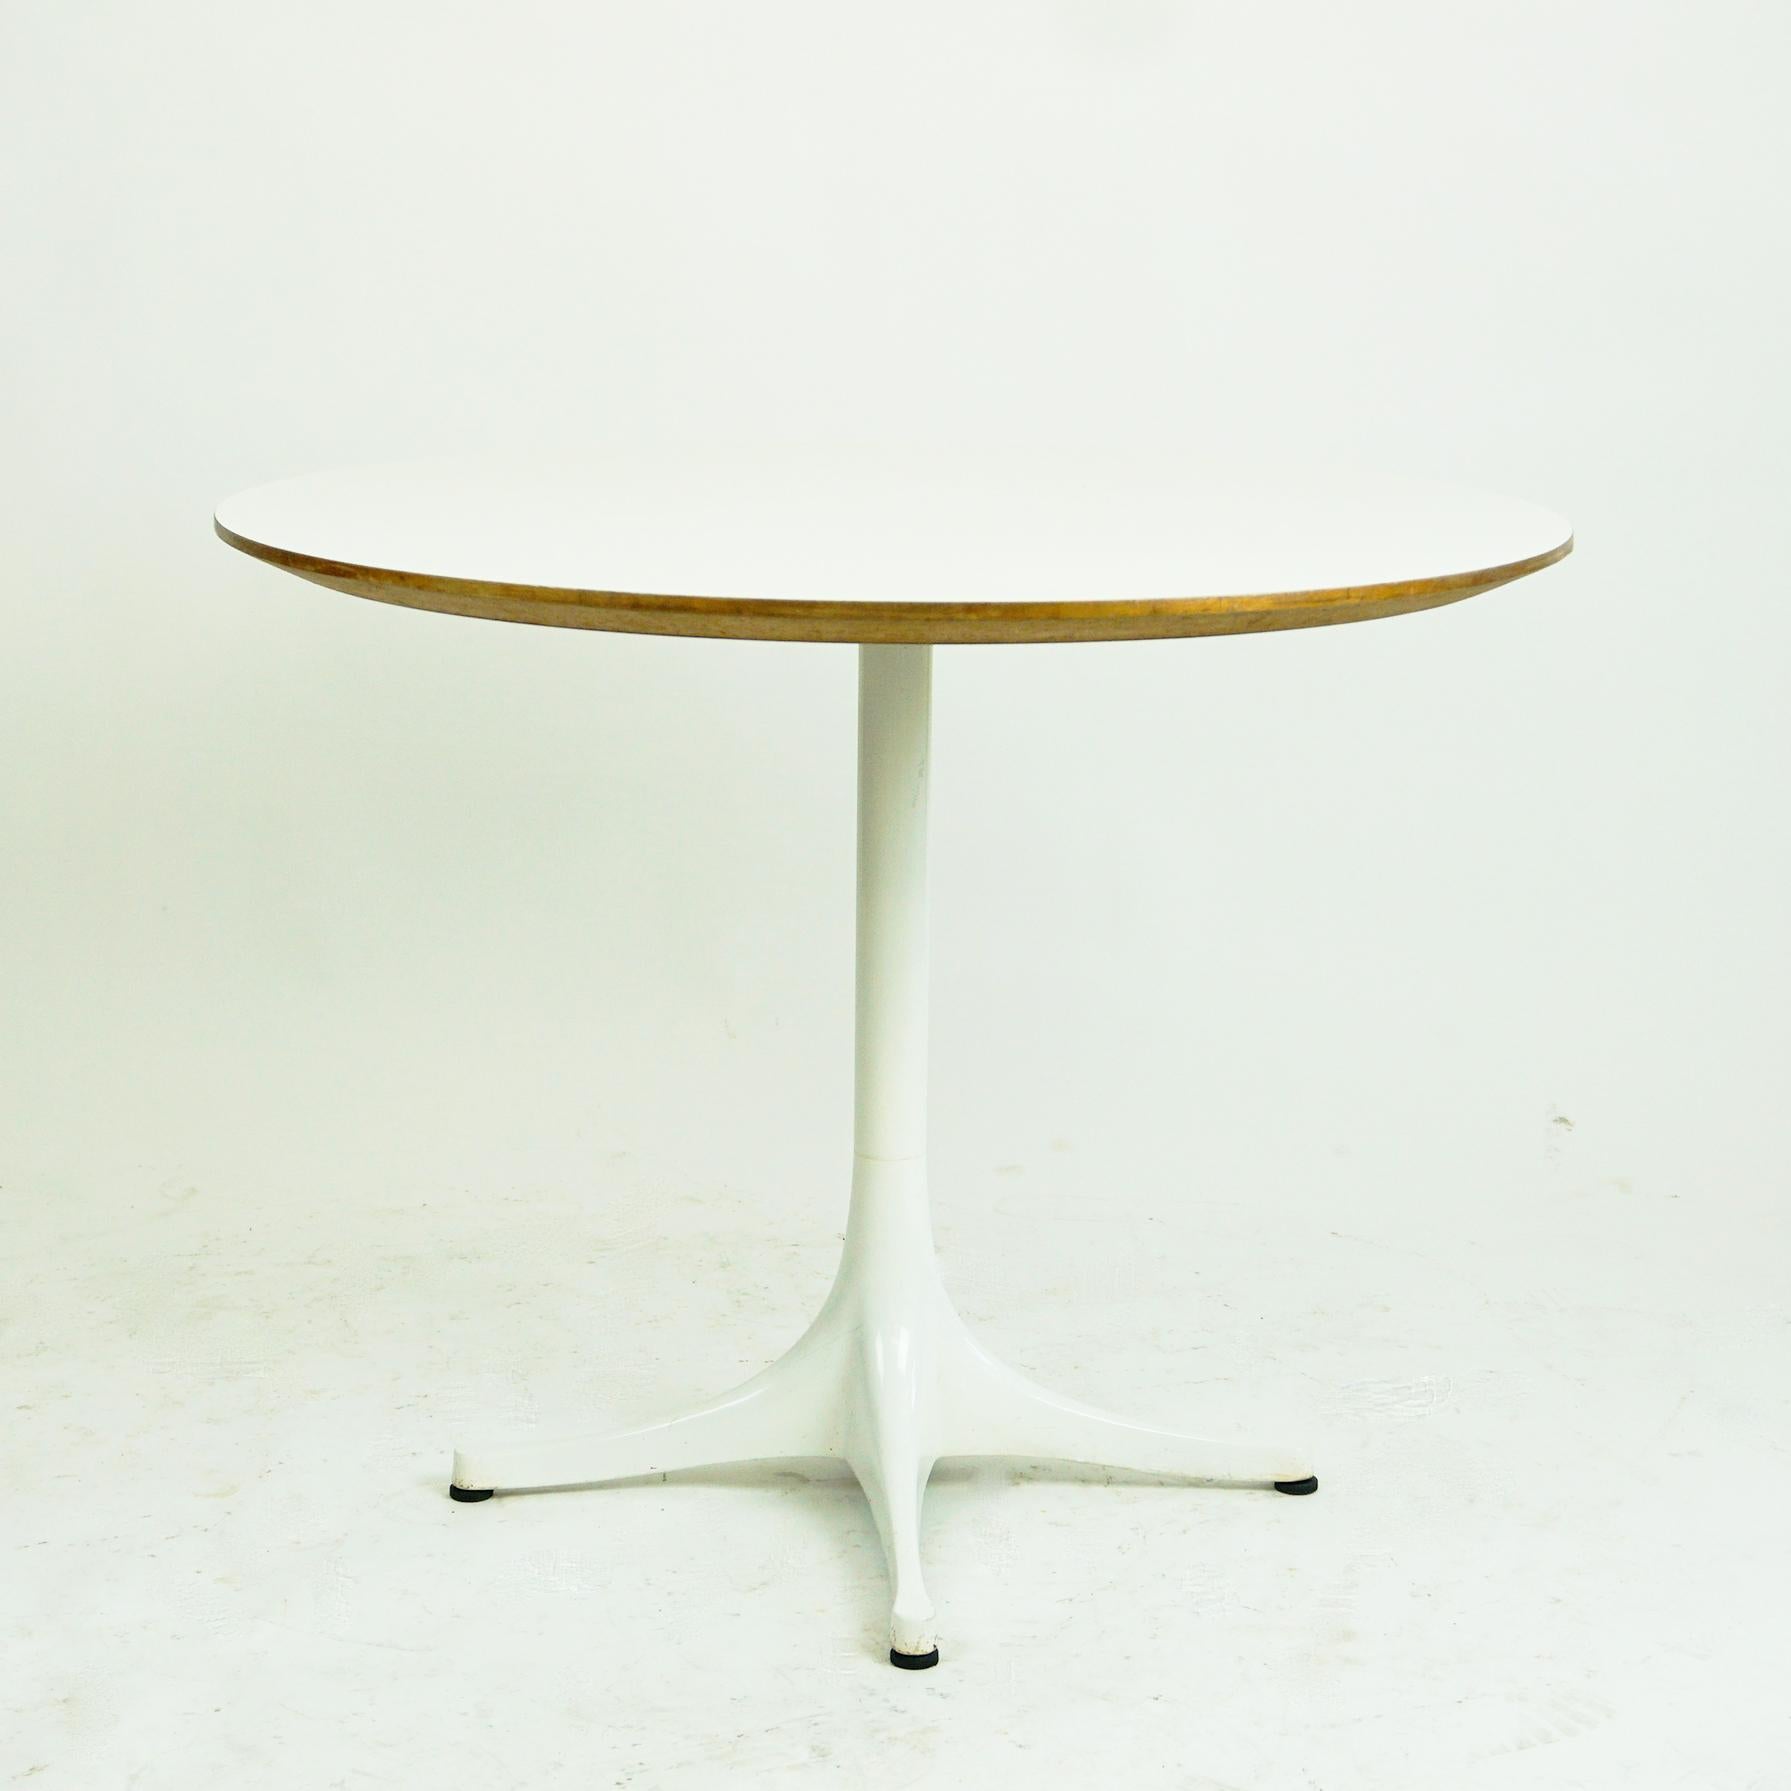 This iconic circular white 5452 pedestal coffee or side table was designed by George Nelson and made by Herman Miller, USA 1960s.
It features a White laminate top and enameled steel pedestal base. 
This is an all original table in very good